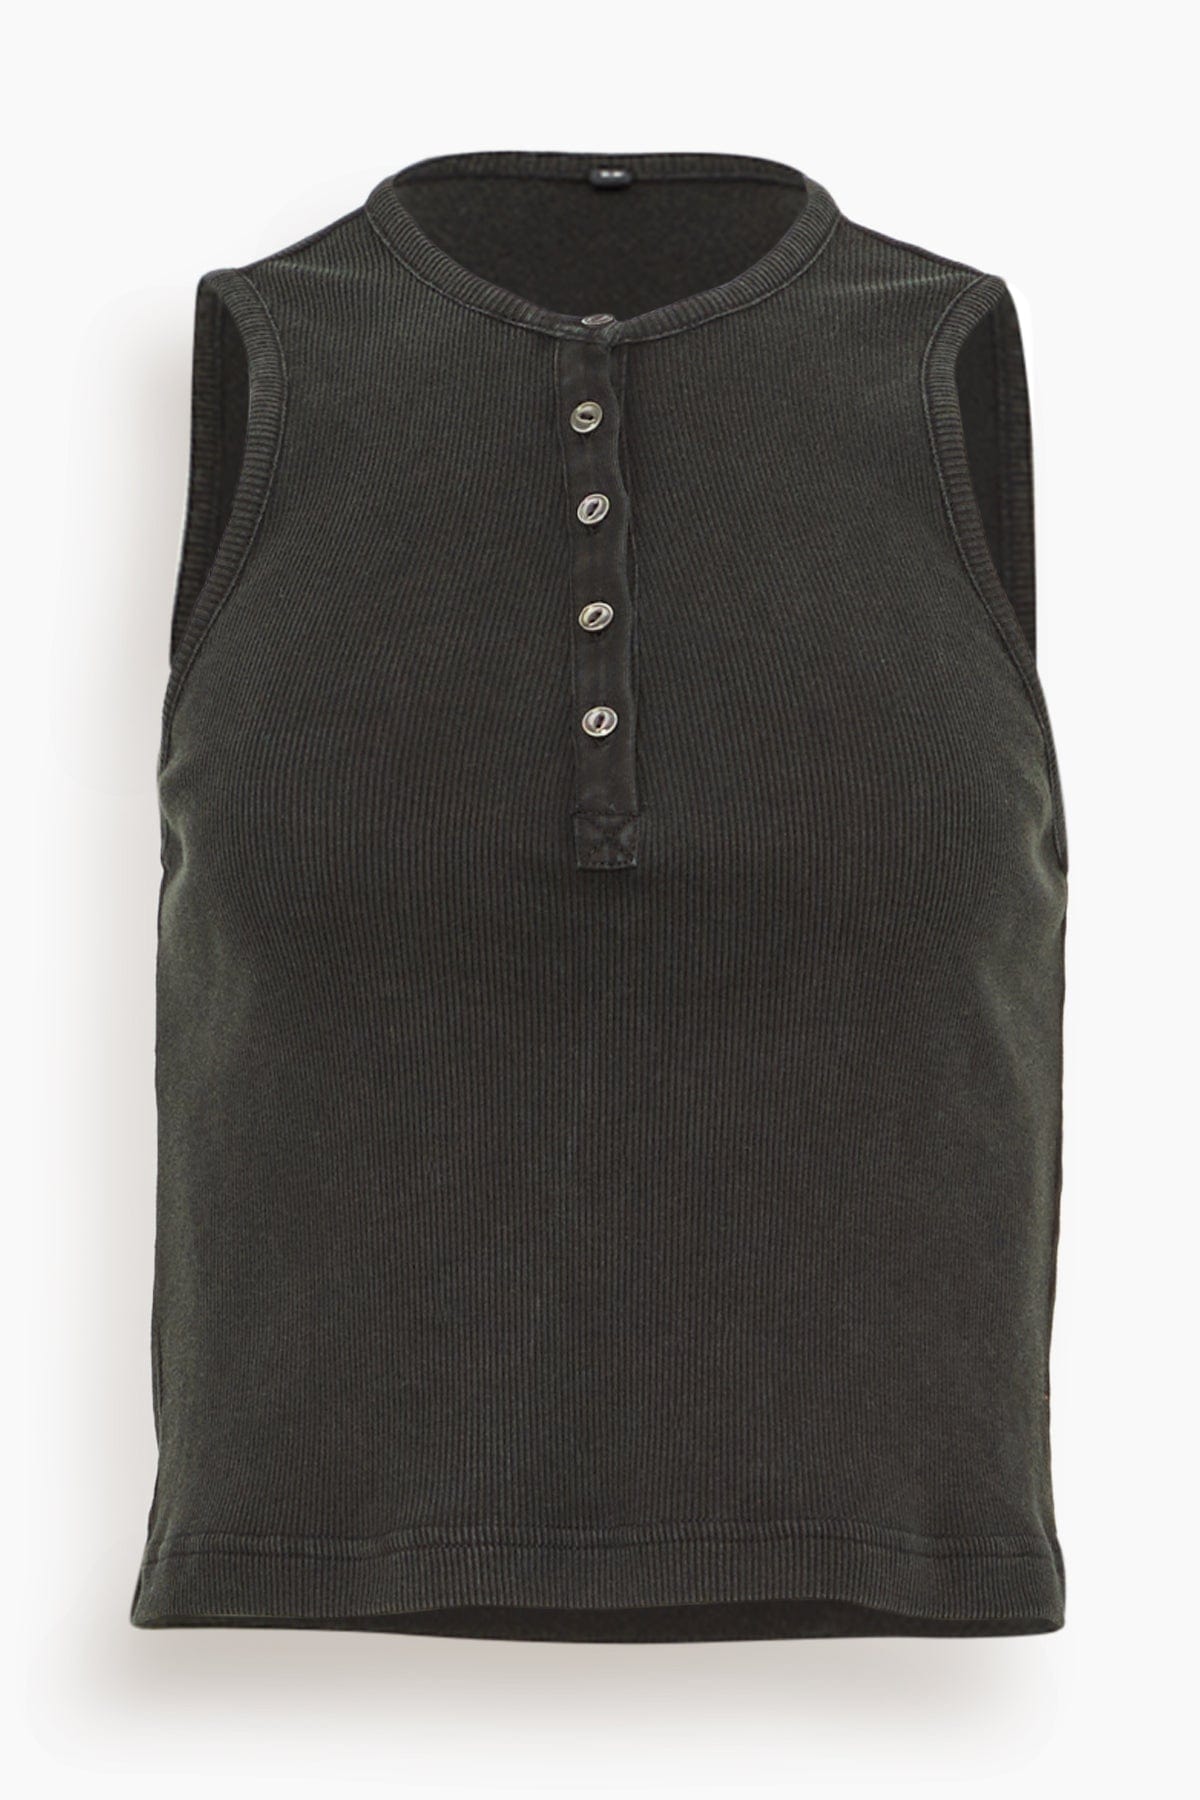 R13 Tops Henley Tank Top in Washed Black